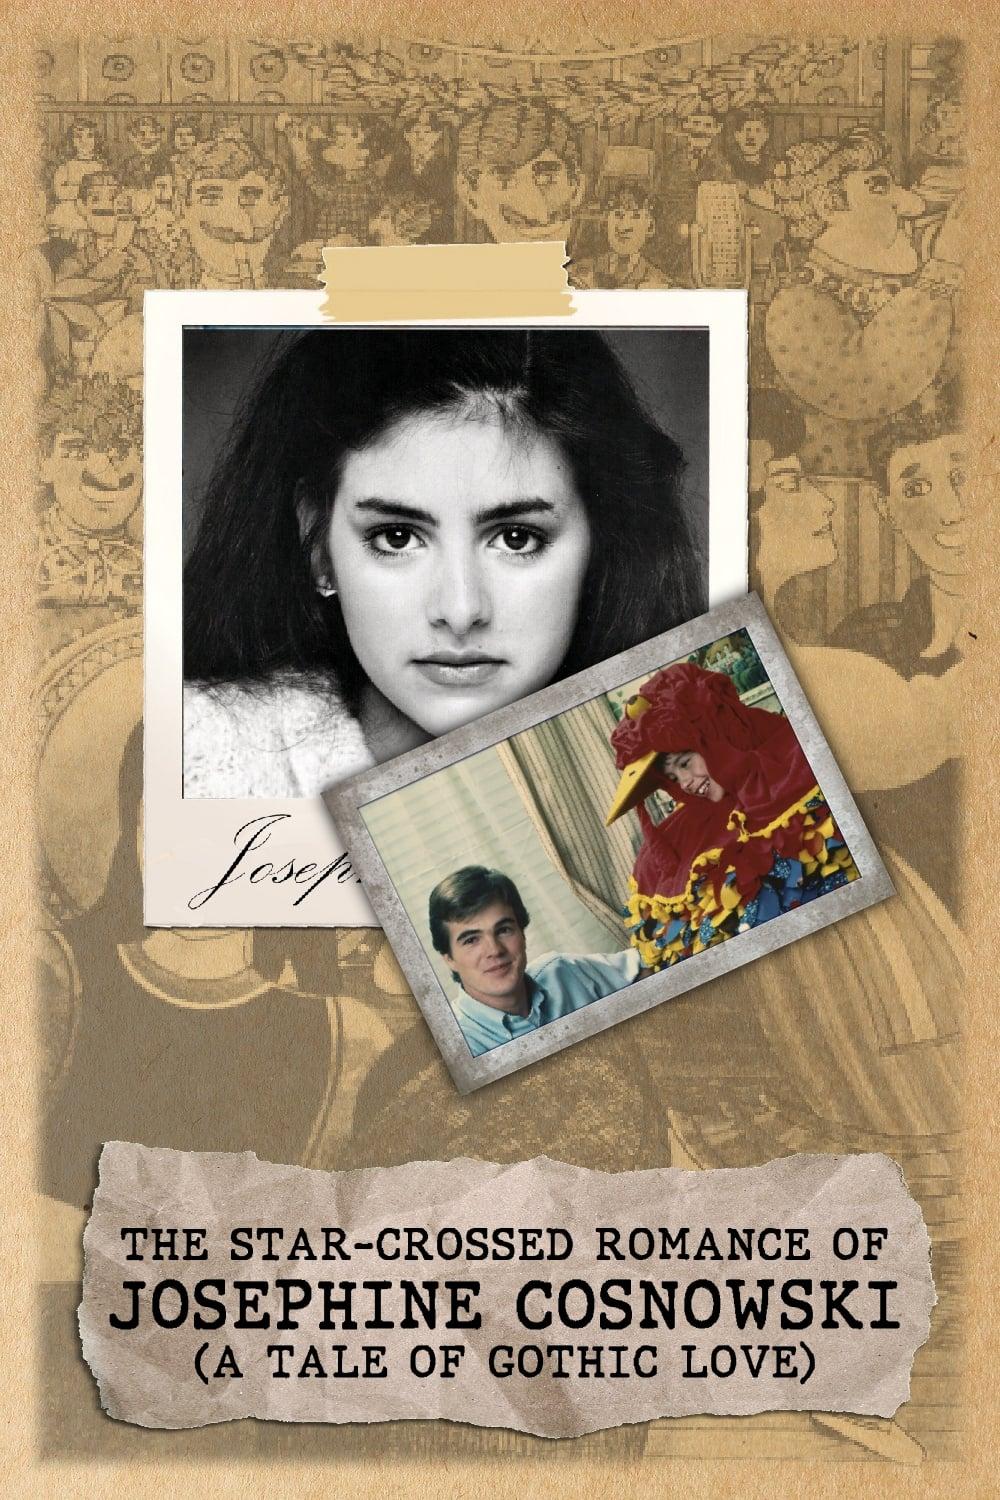 The Star-Crossed Romance of Josephine Cosnowski (a Tale of Gothic Love) poster